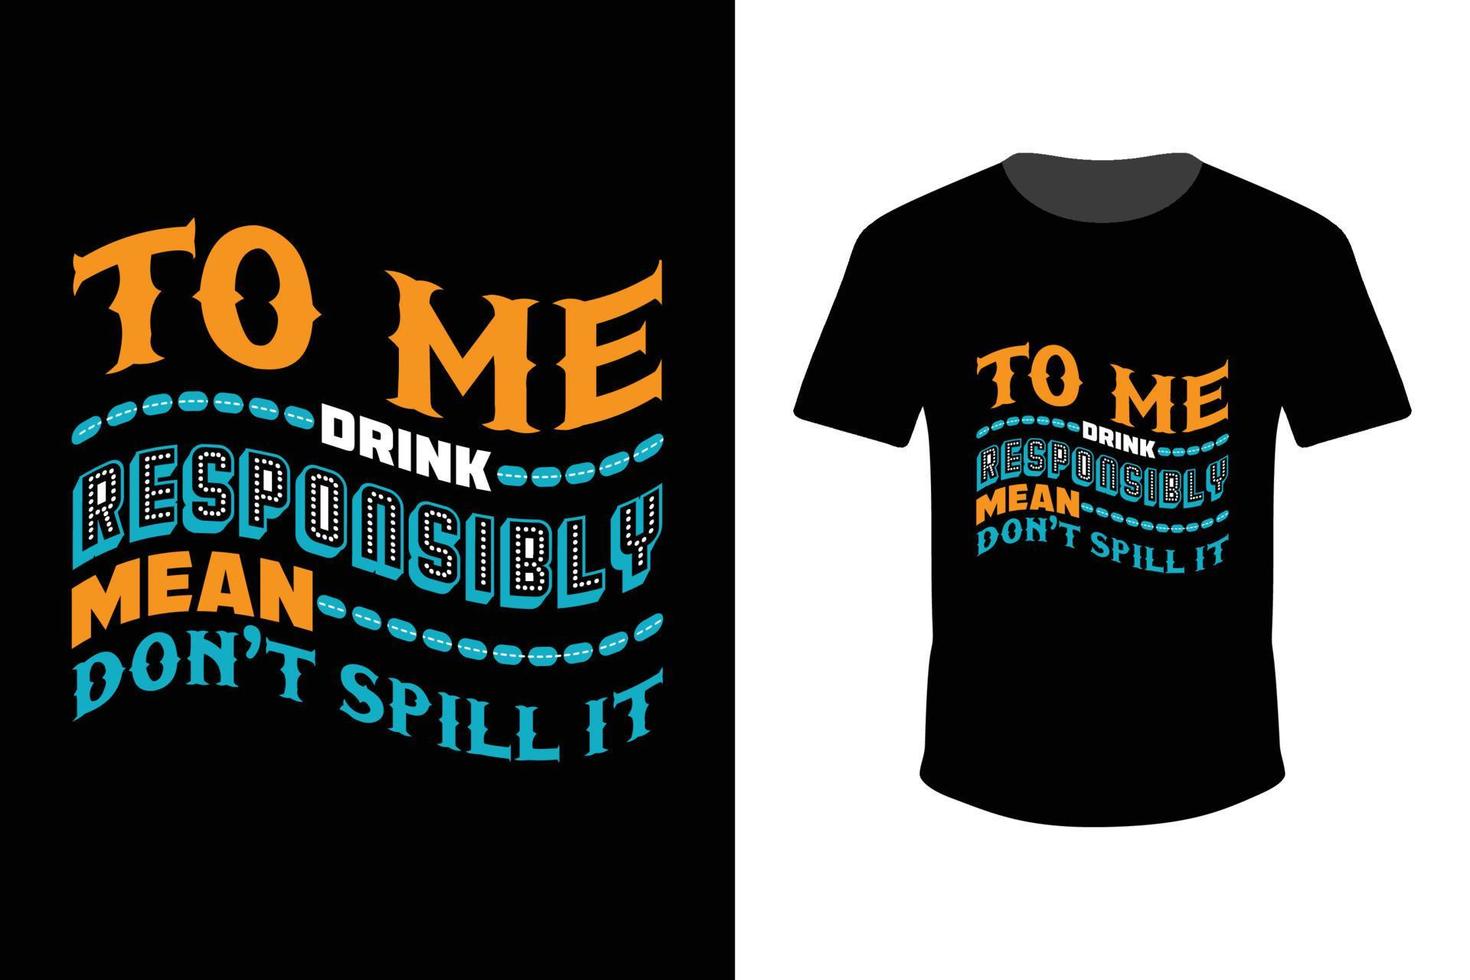 To me drink responsibly means don't spill it - men's t-shirt design vector for print